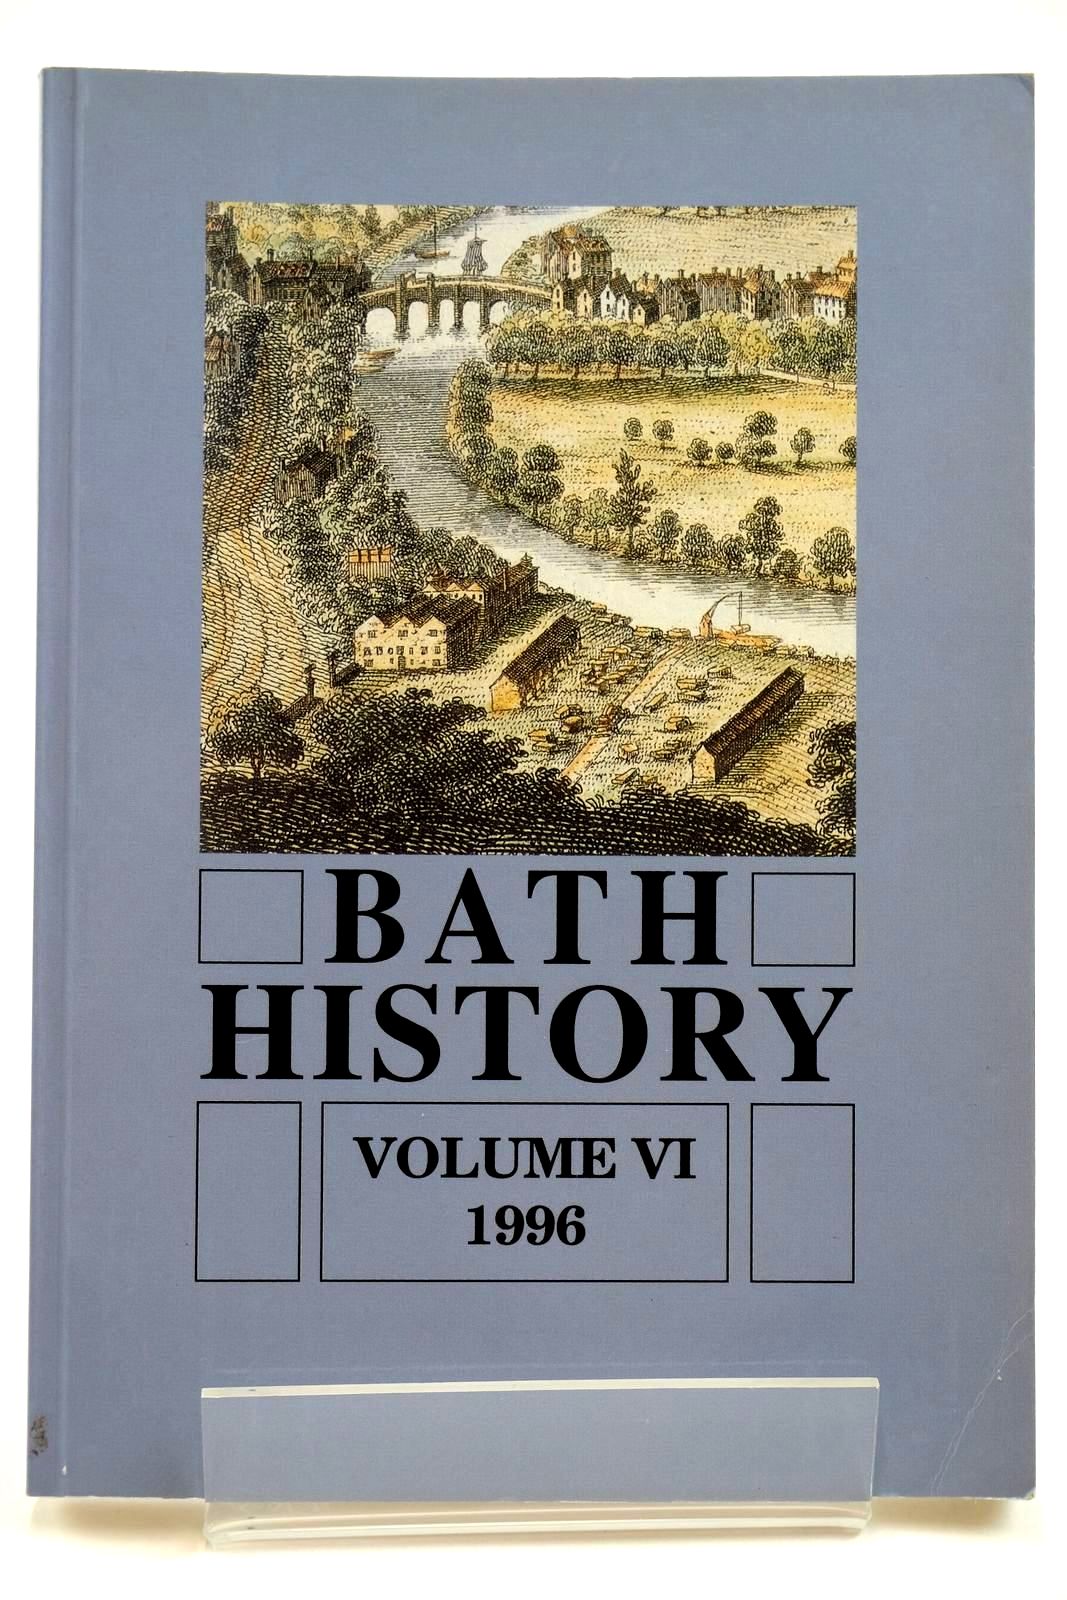 Photo of BATH HISTORY VOLUME VI written by Buchanan, Brenda J. published by Millstream Books (STOCK CODE: 2131974)  for sale by Stella & Rose's Books